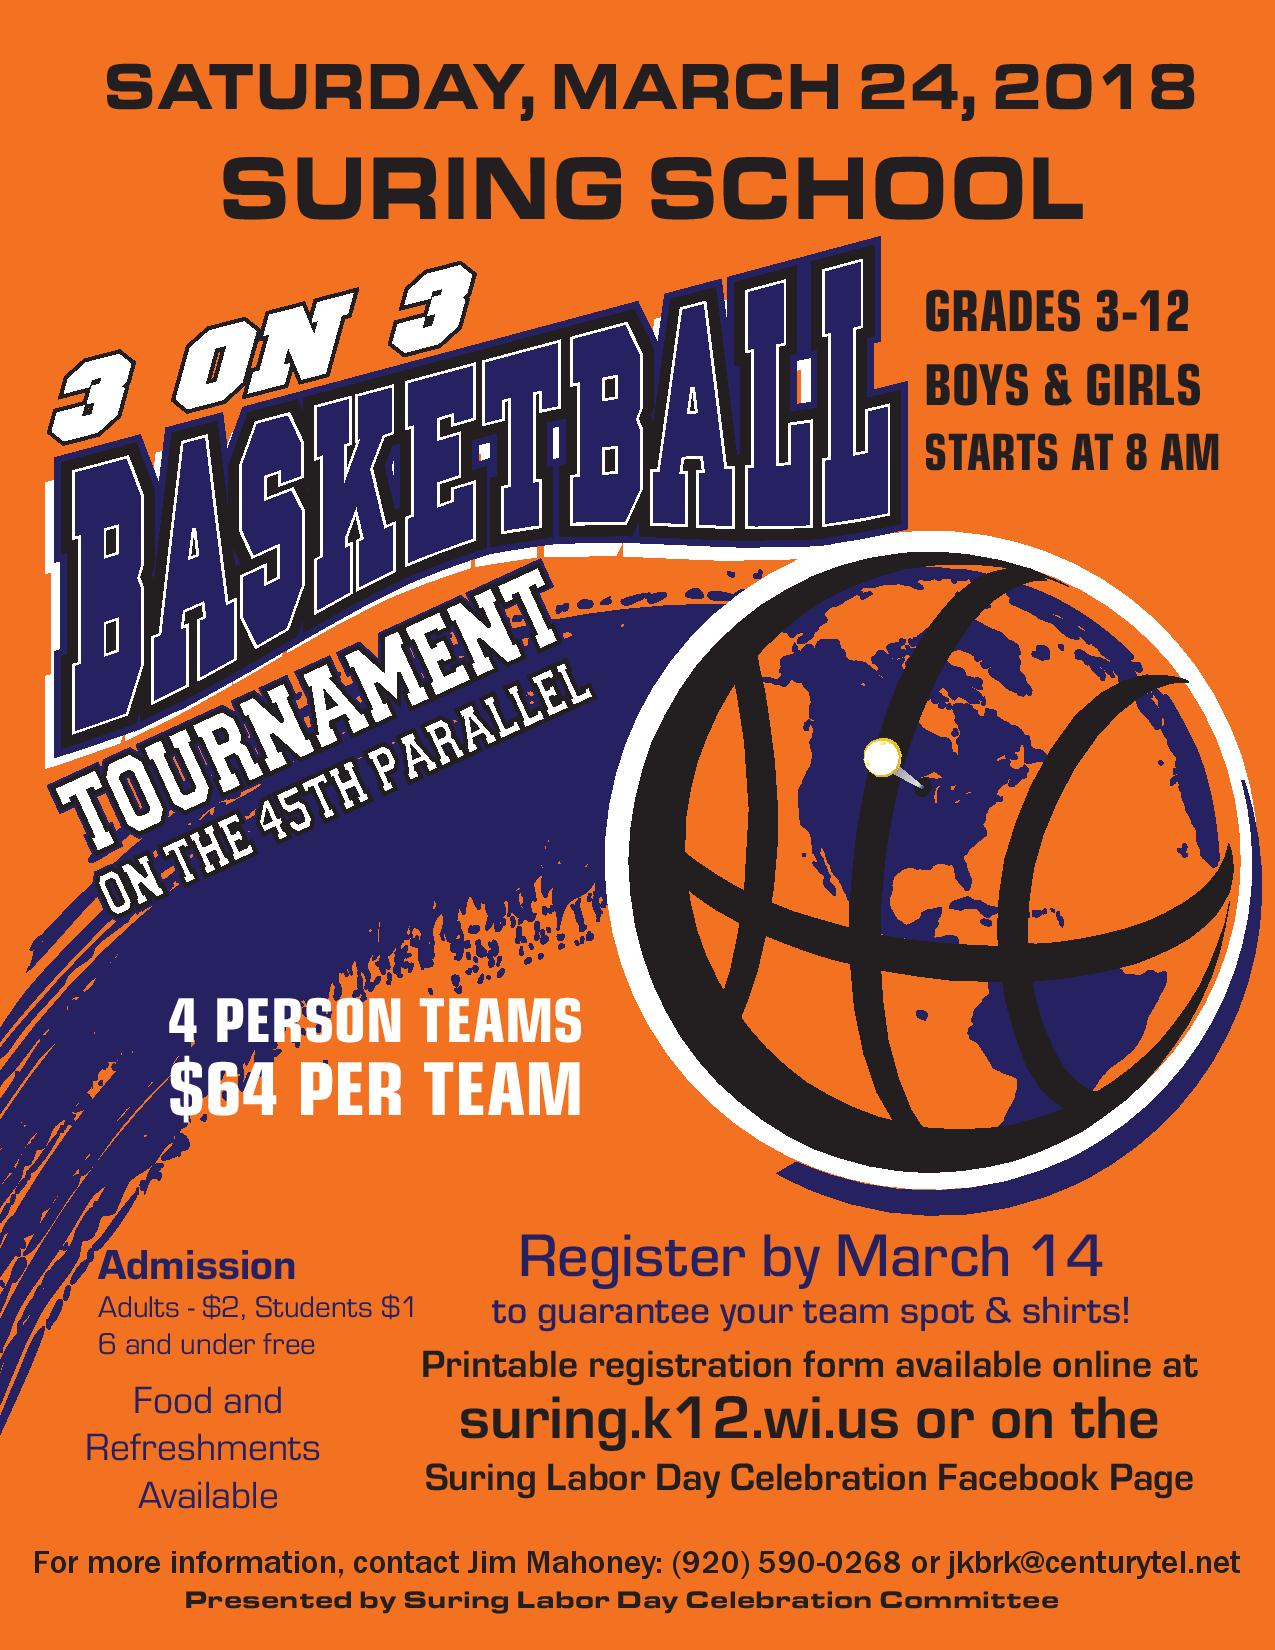 Suring School 21 on 21 Basketball Tournament – March 21, 21 Inside 3 On 3 Basketball Tournament Flyer Template